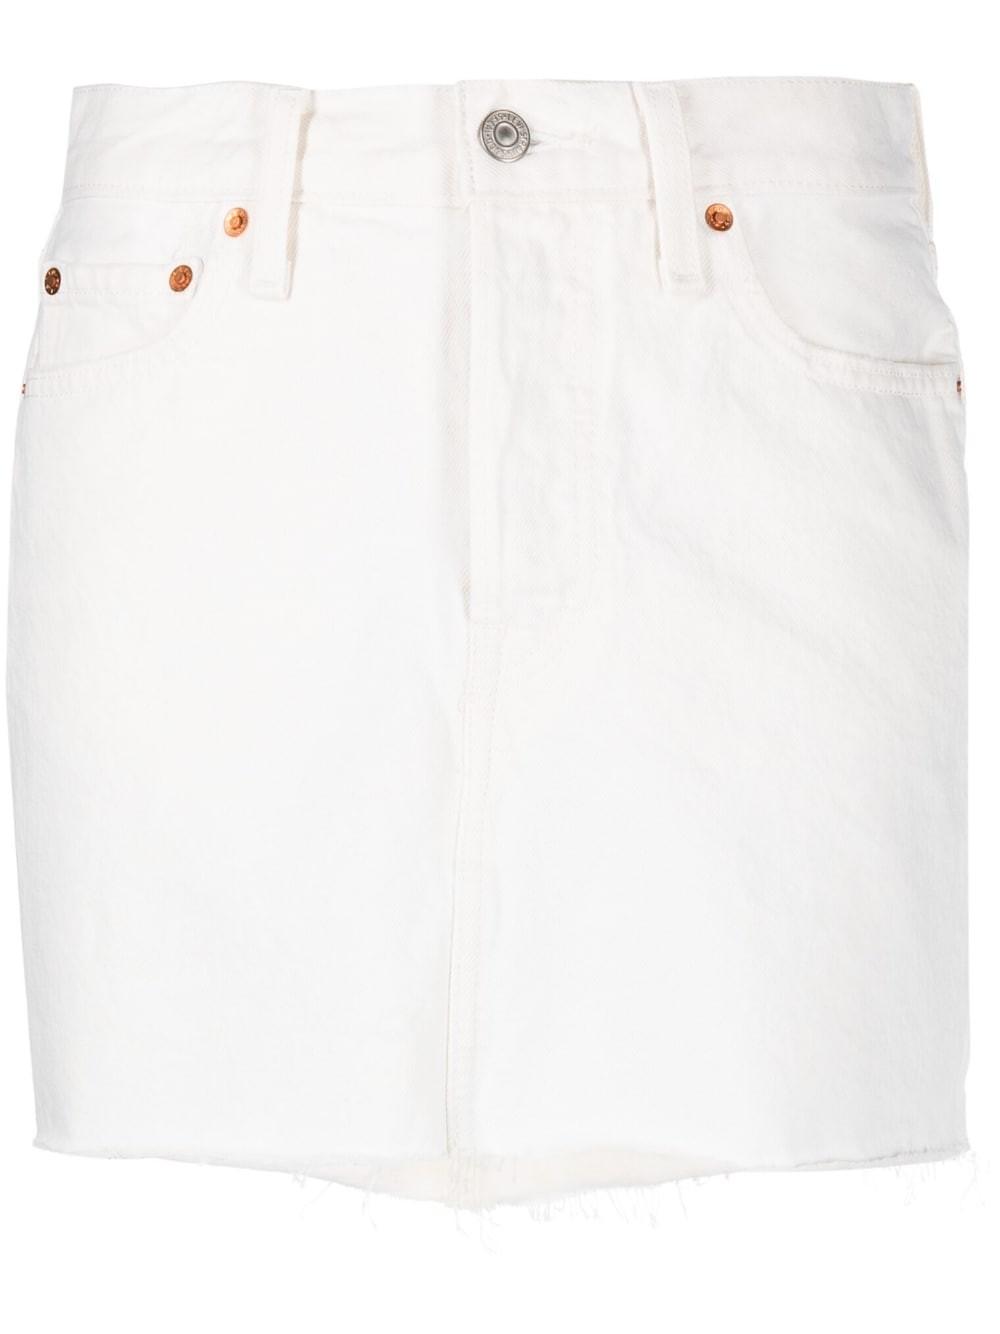 Levi's Denim Skirt With Unfinished Hem in White | Lyst